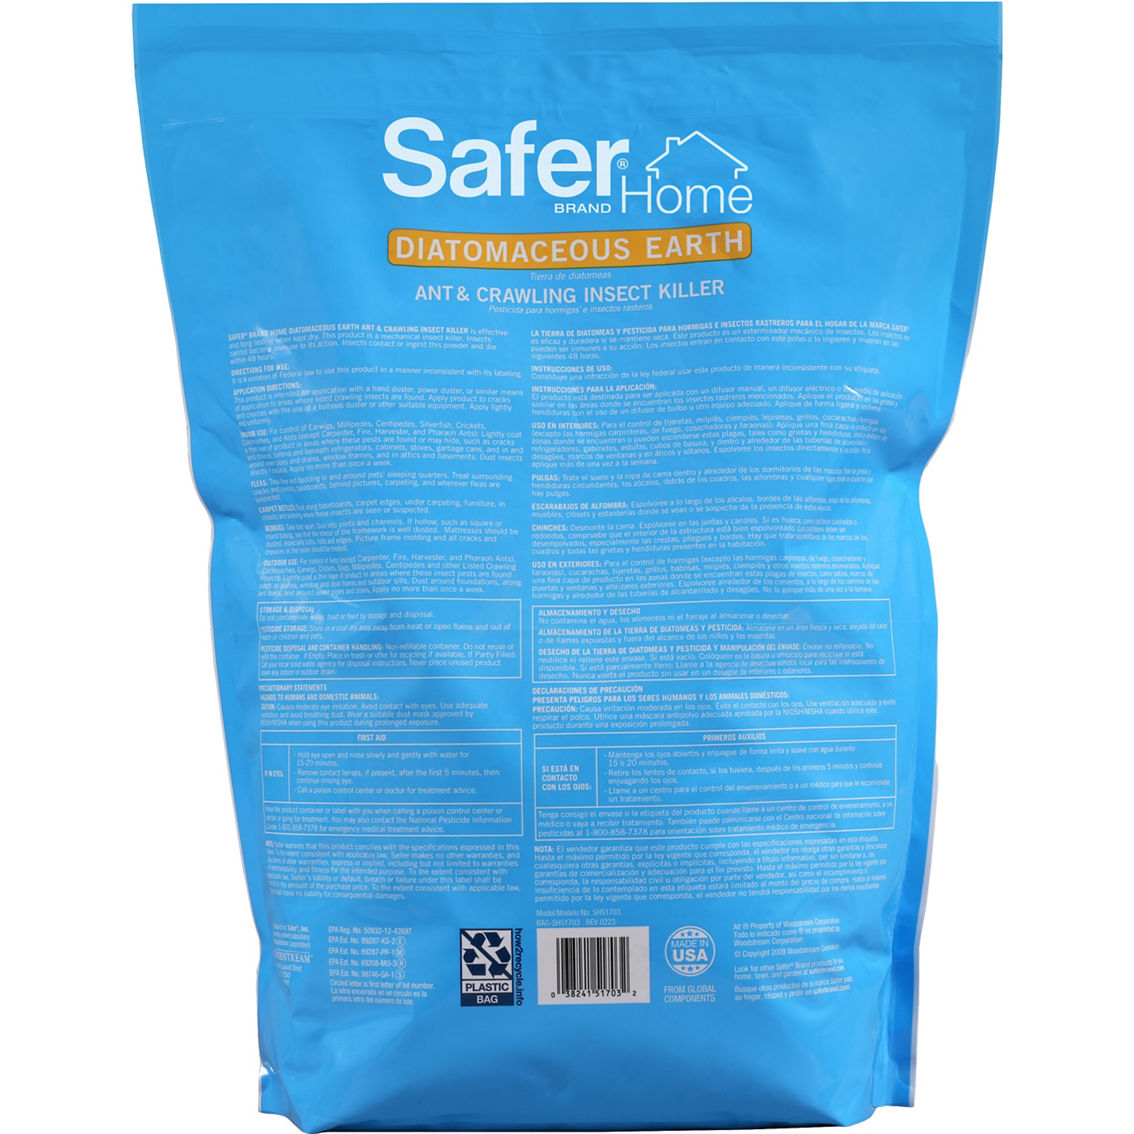 Safer Home Diatomaceous Earth Ant and Crawling Insect Killer 4 lb. - Image 2 of 2